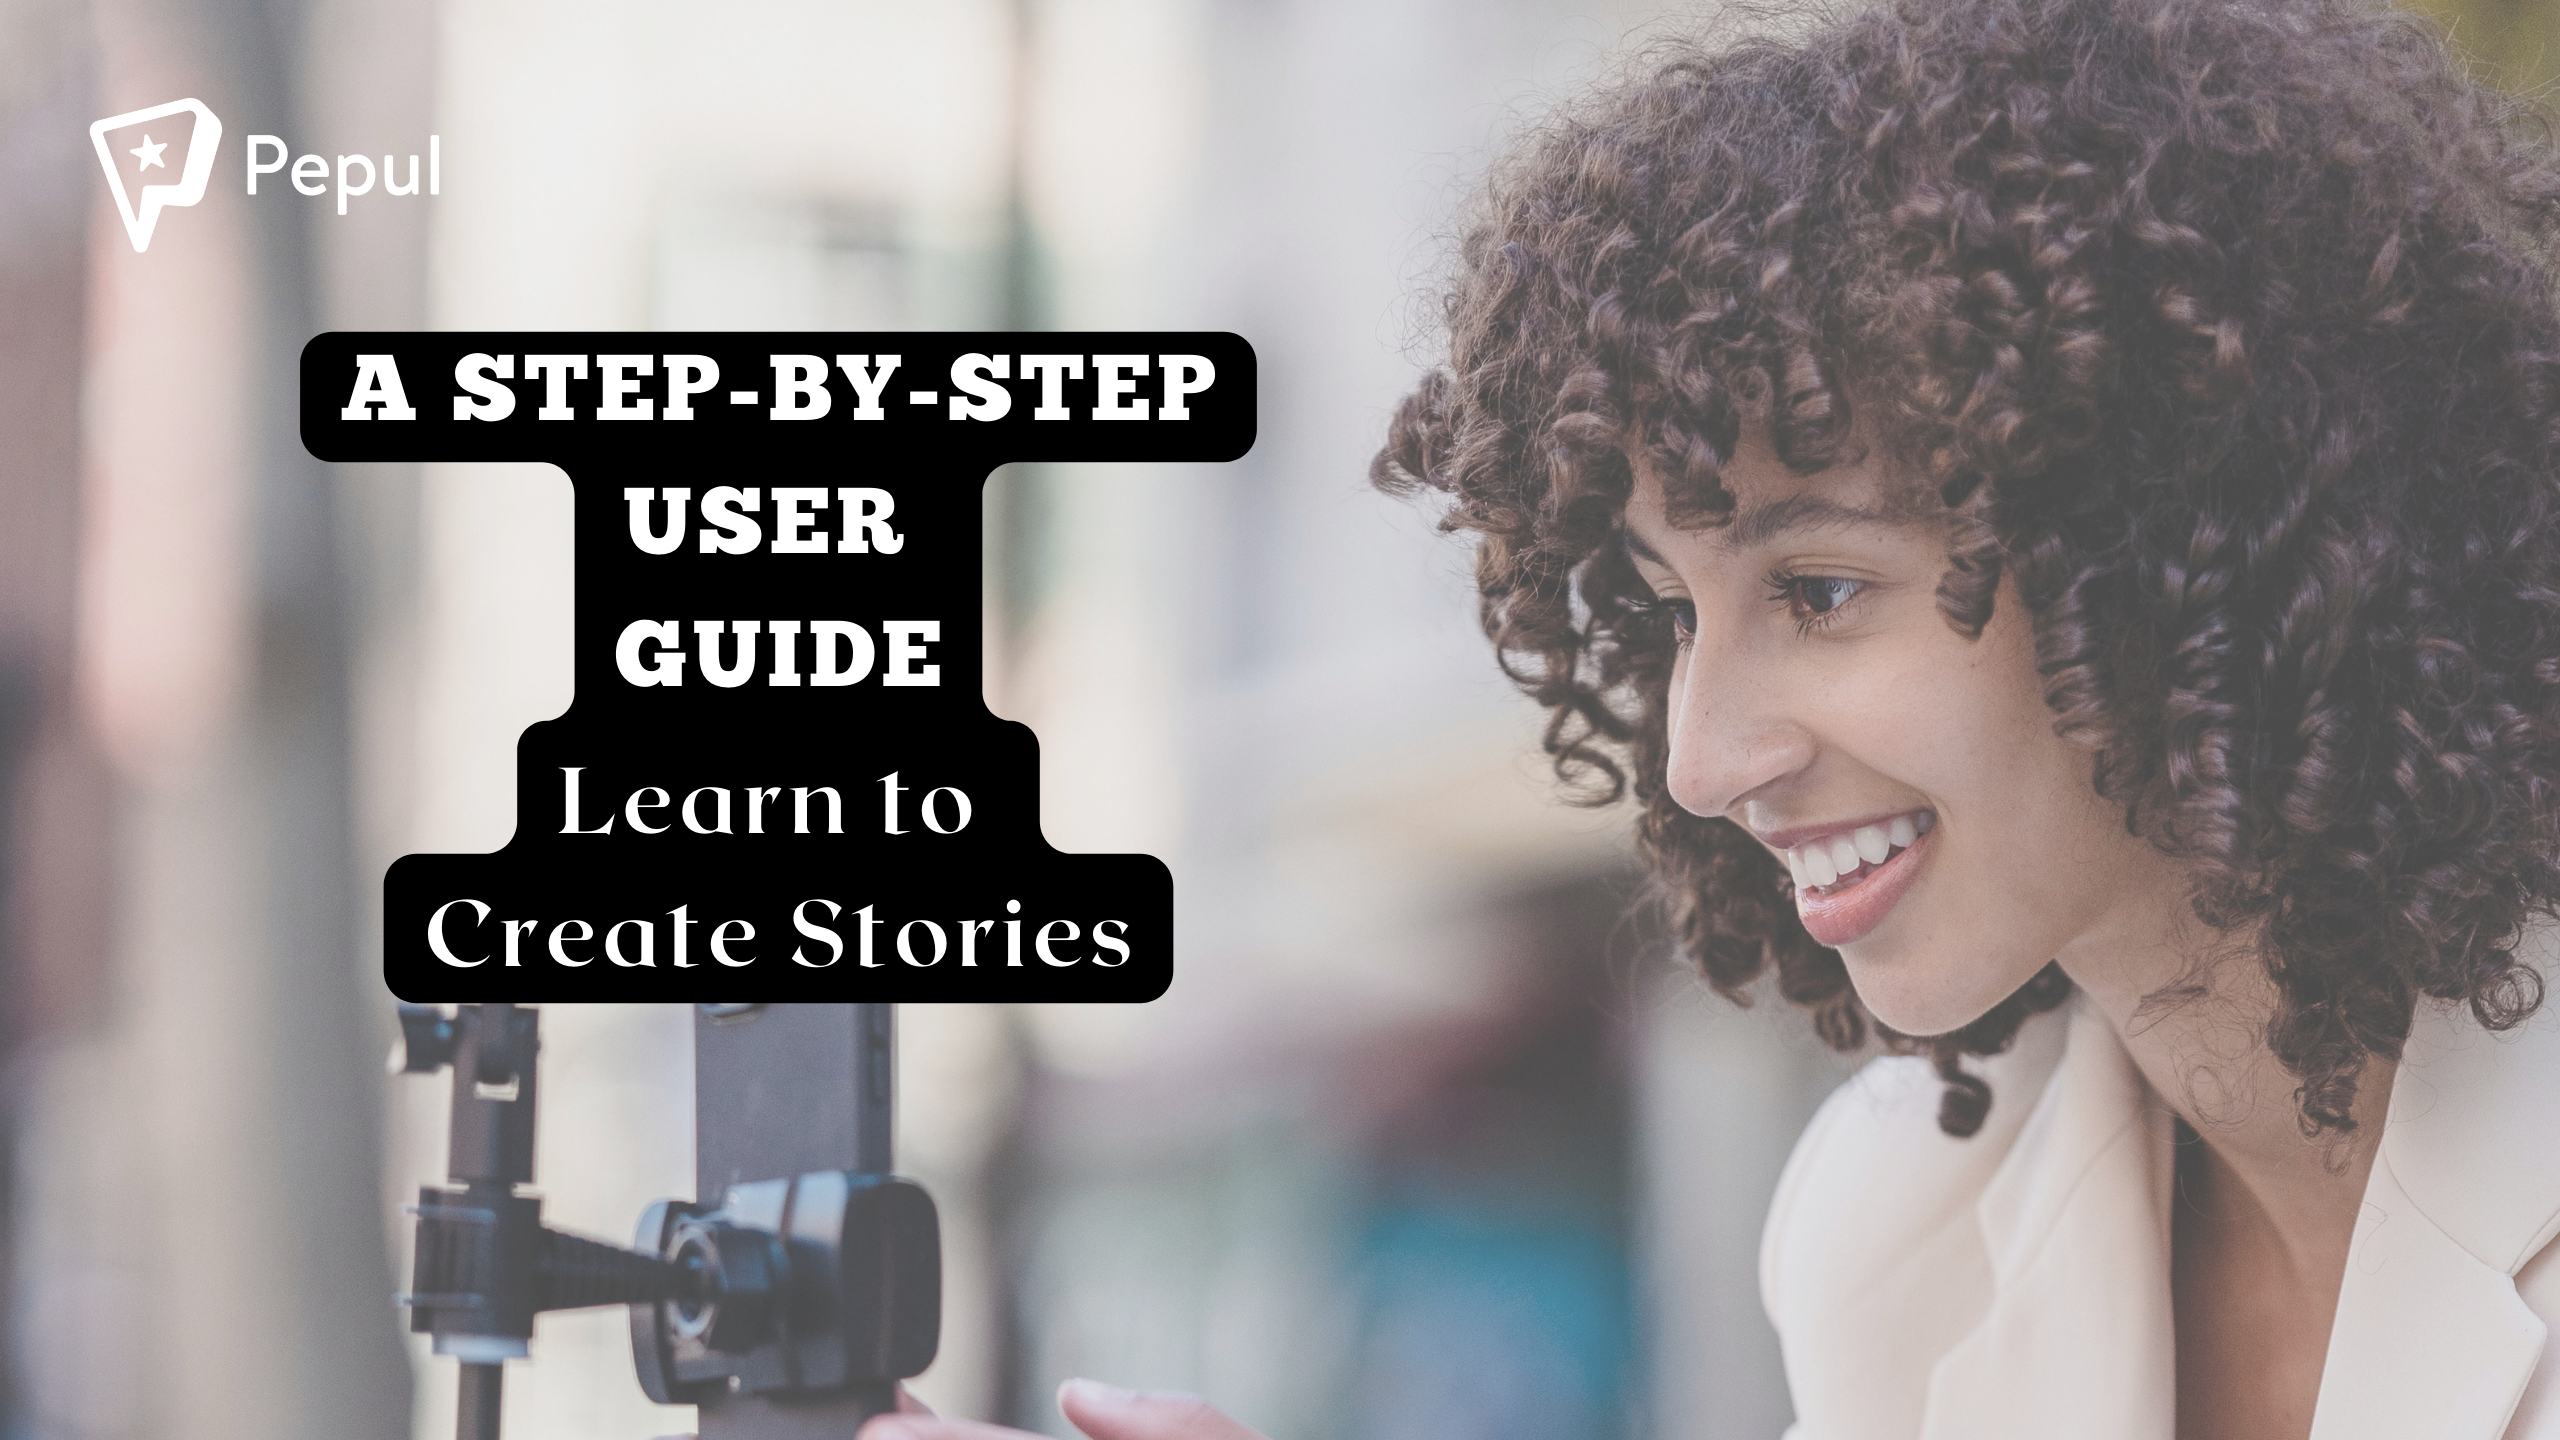 A Step-by-Step User Guide: Learn to Create Stories in the app